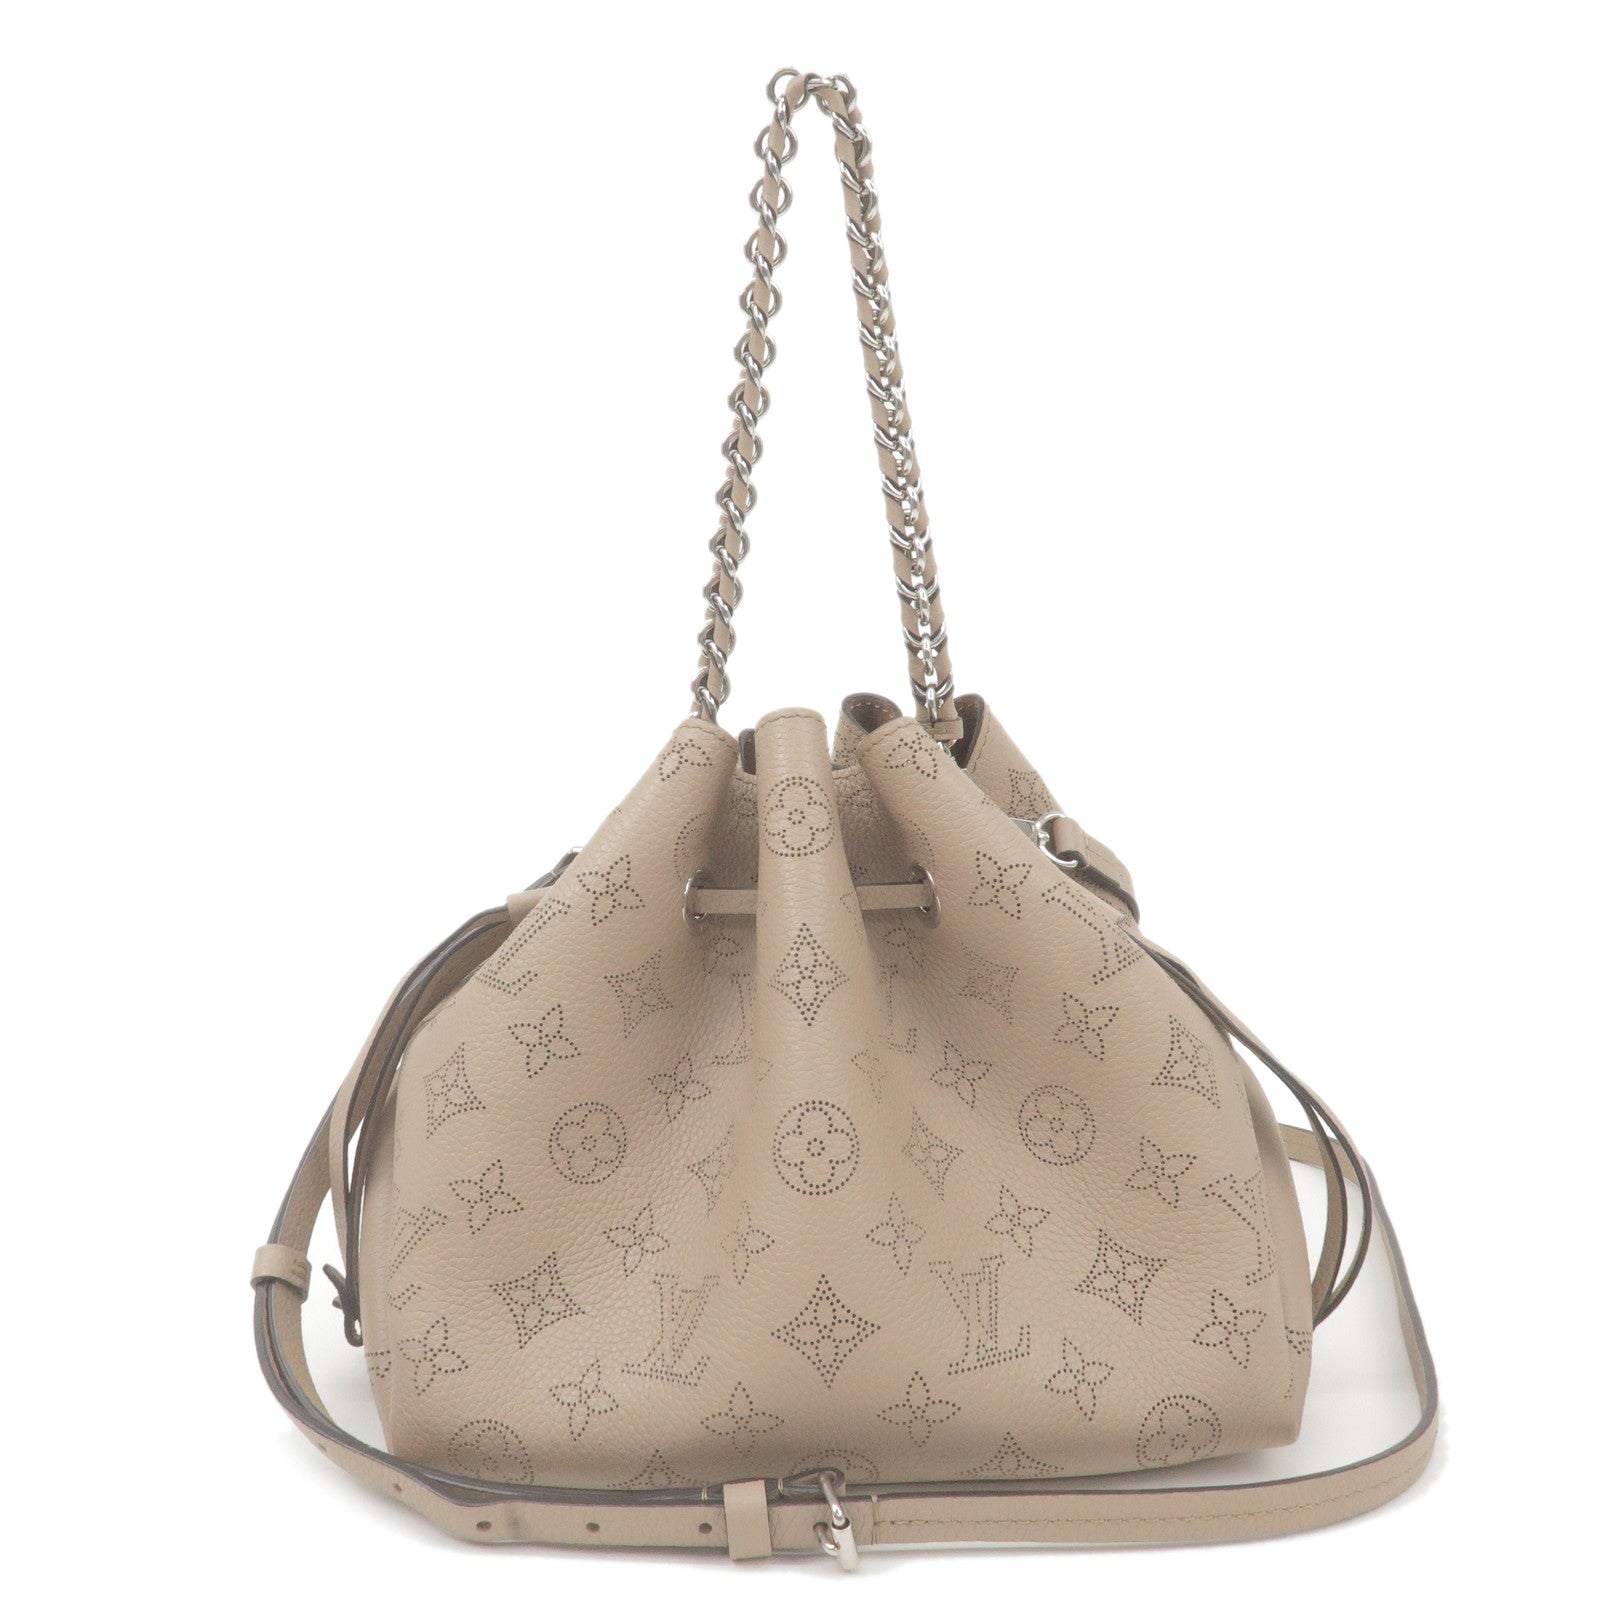 Authentic Louis Vuitton Muria Bucket Bag in Black Mahina Leather